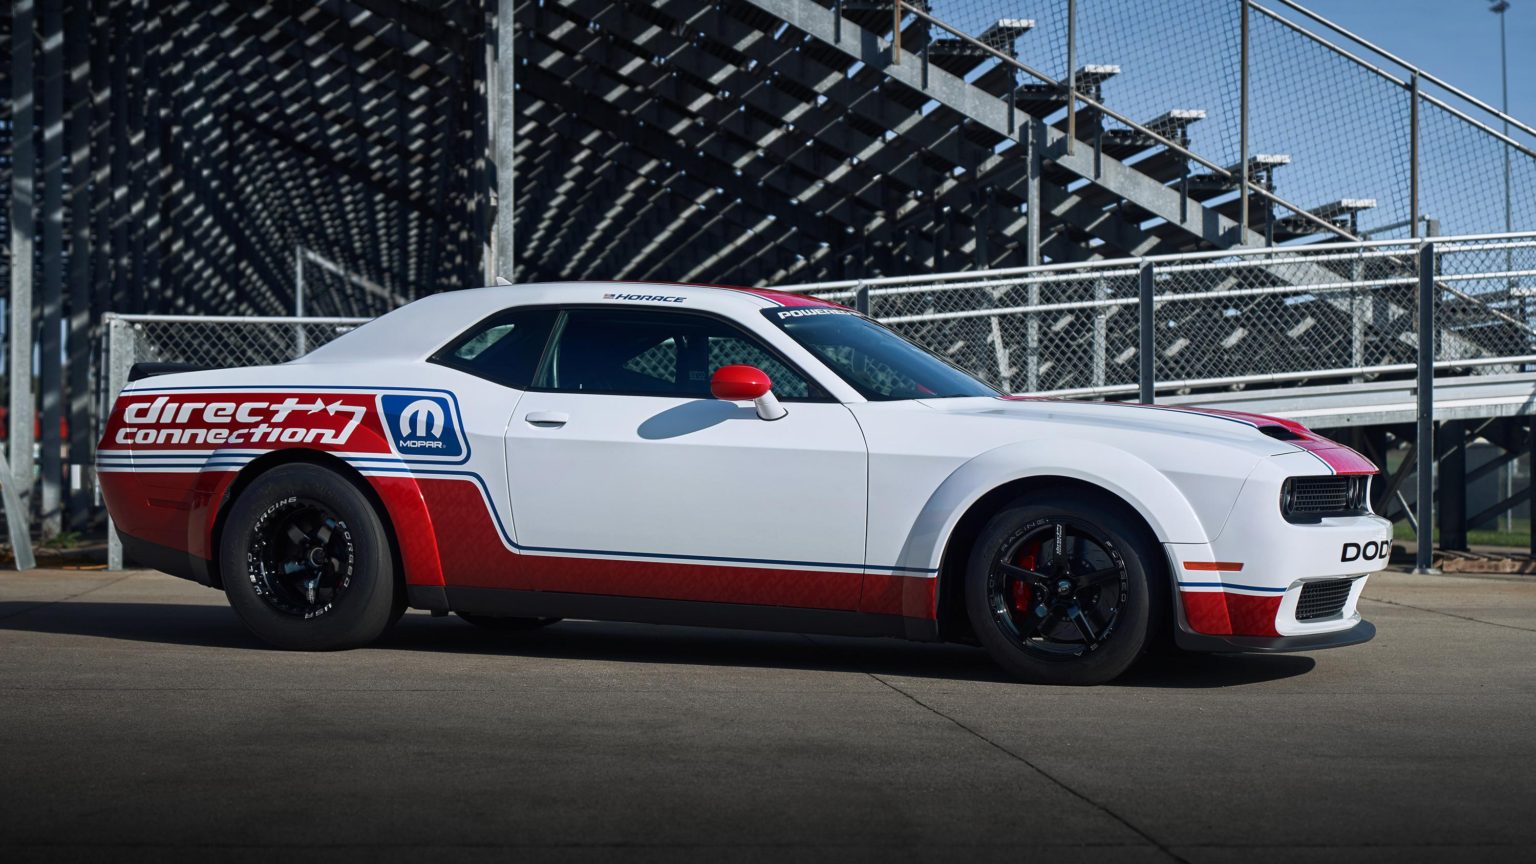 Dodge offers upgrades that push power to 885 ponies in some models.